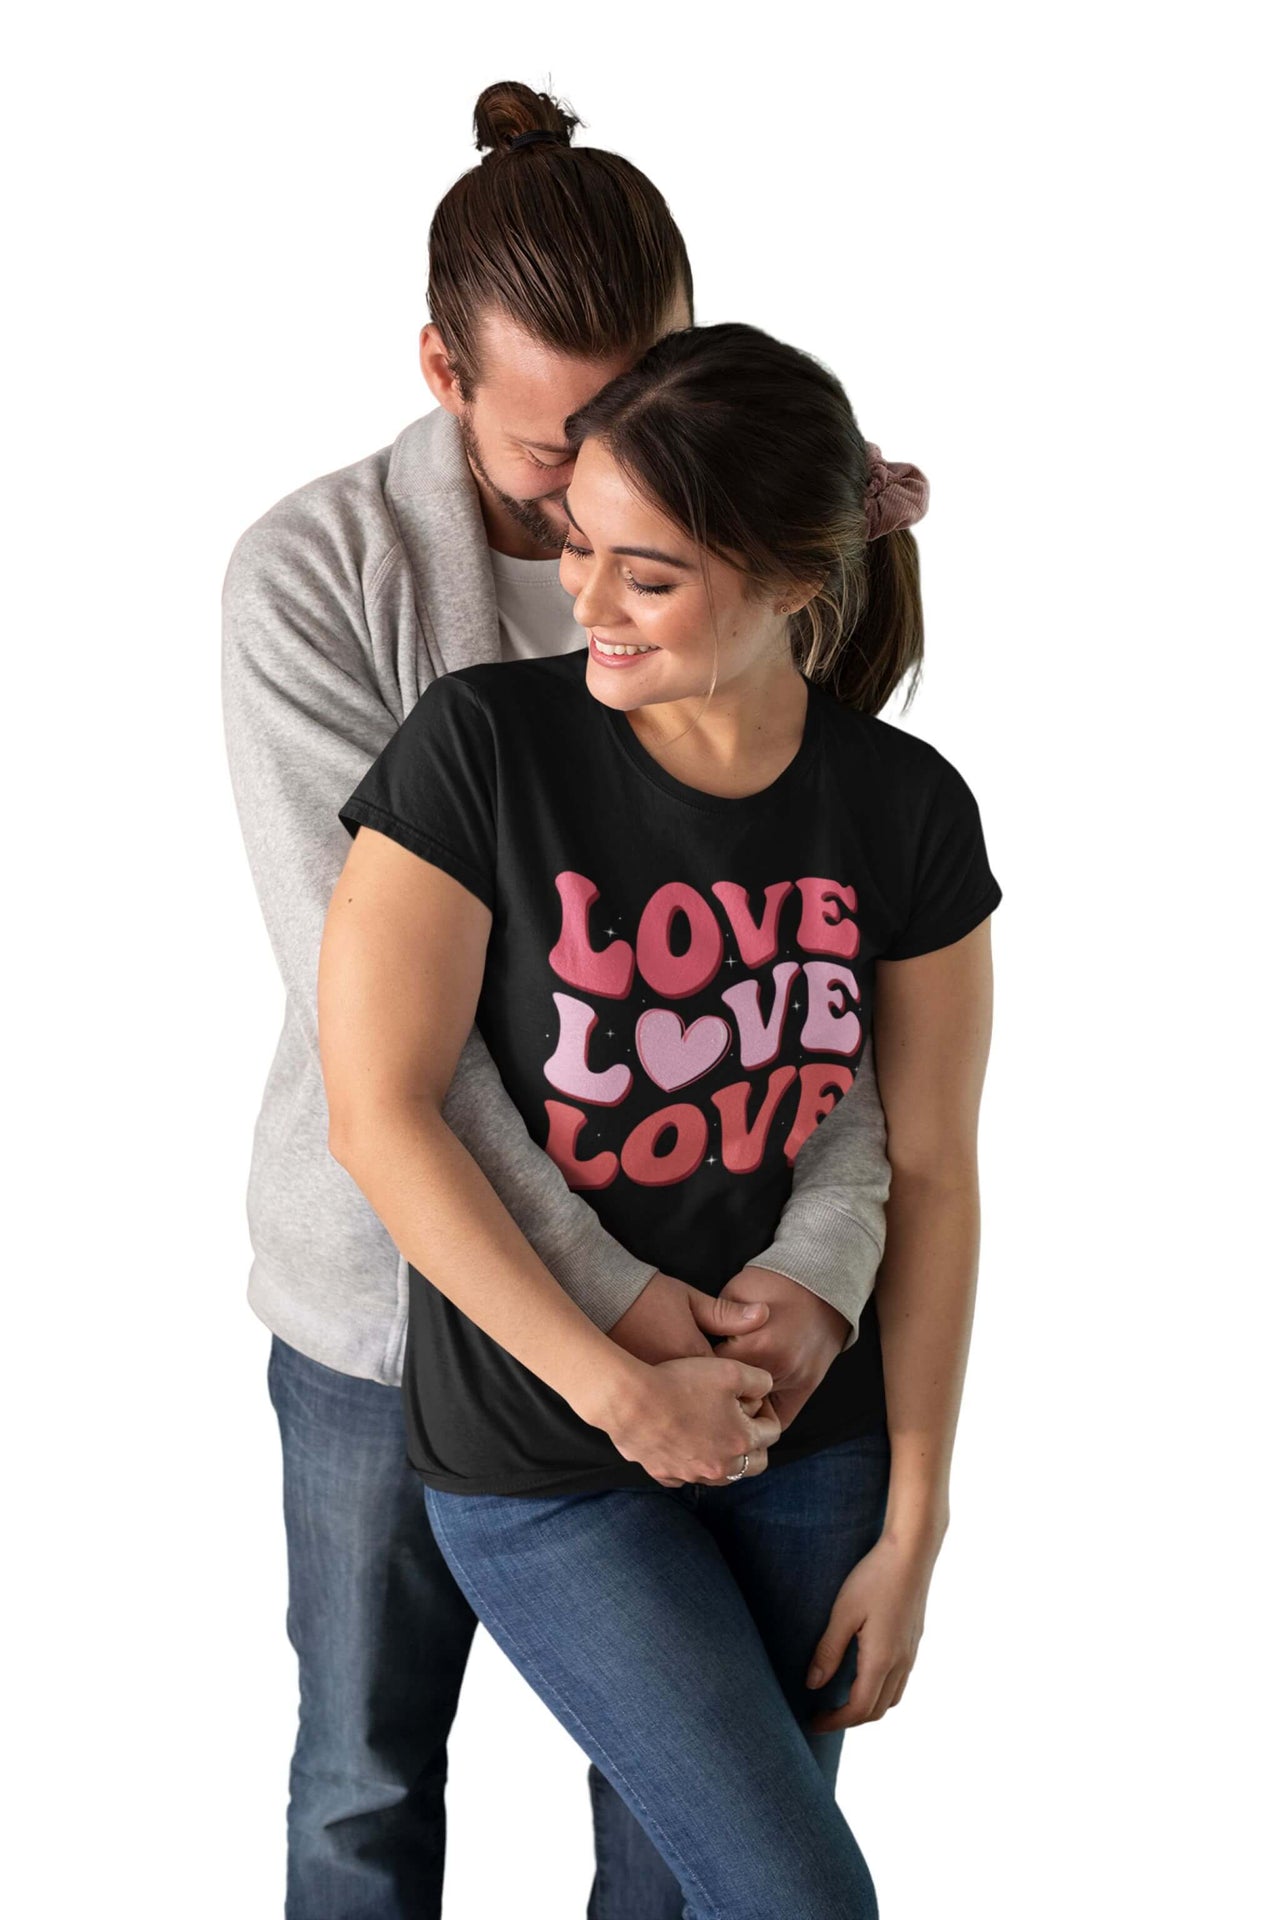 Three Times The Love With A Heart - Women's Boyfriend Tee - Valentines Day Gift - Meaningful Gift for Her